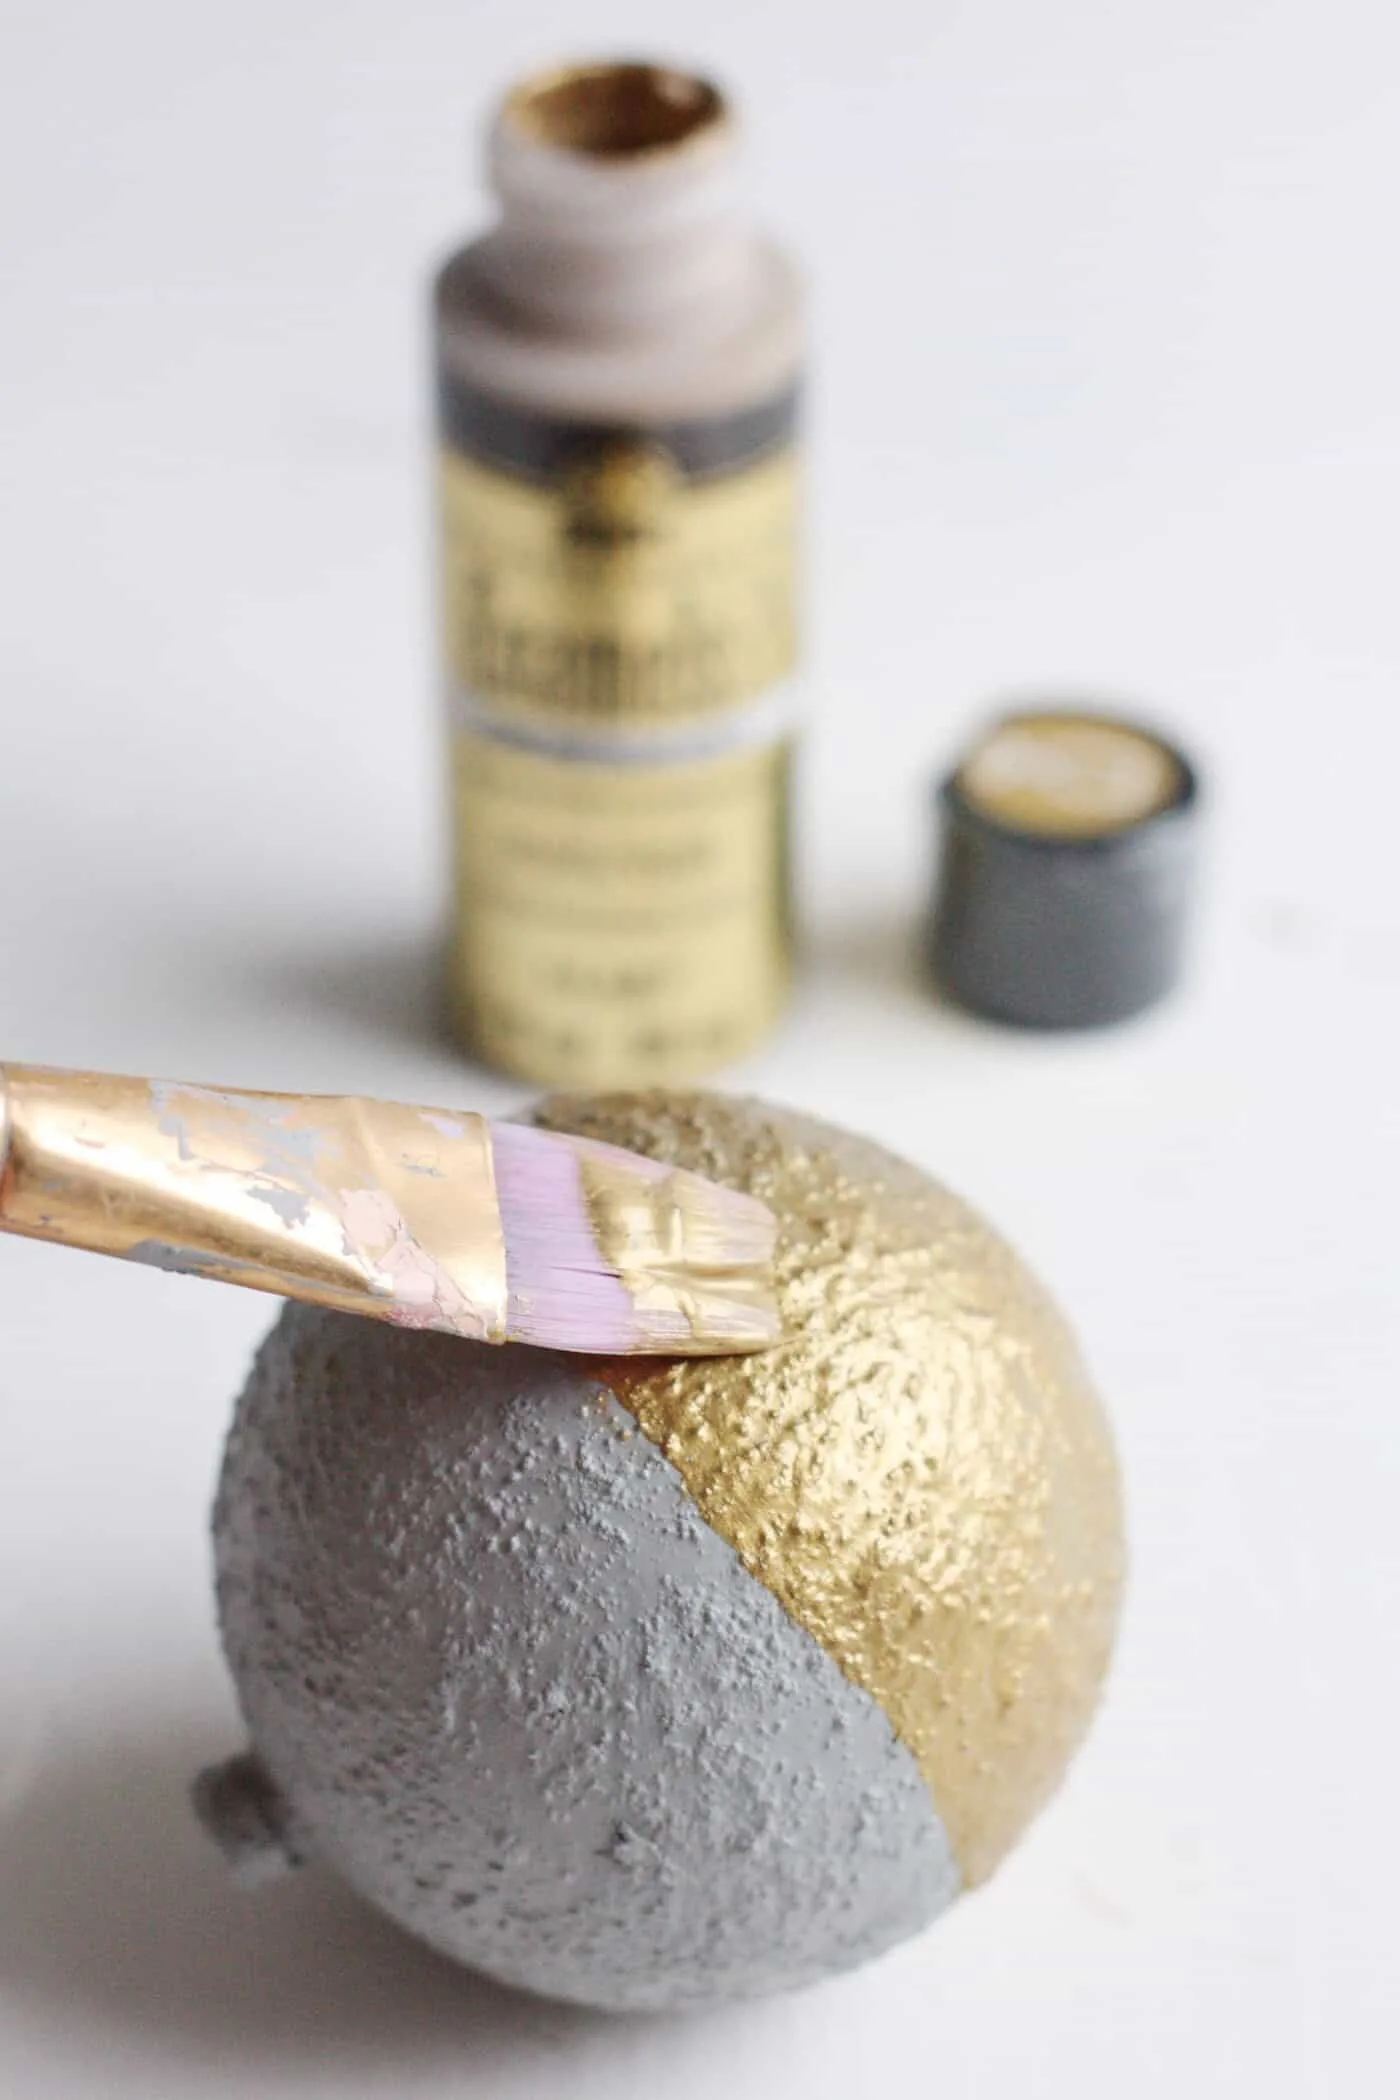 Painting the bottom half of a cement ornament with metallic gold paint